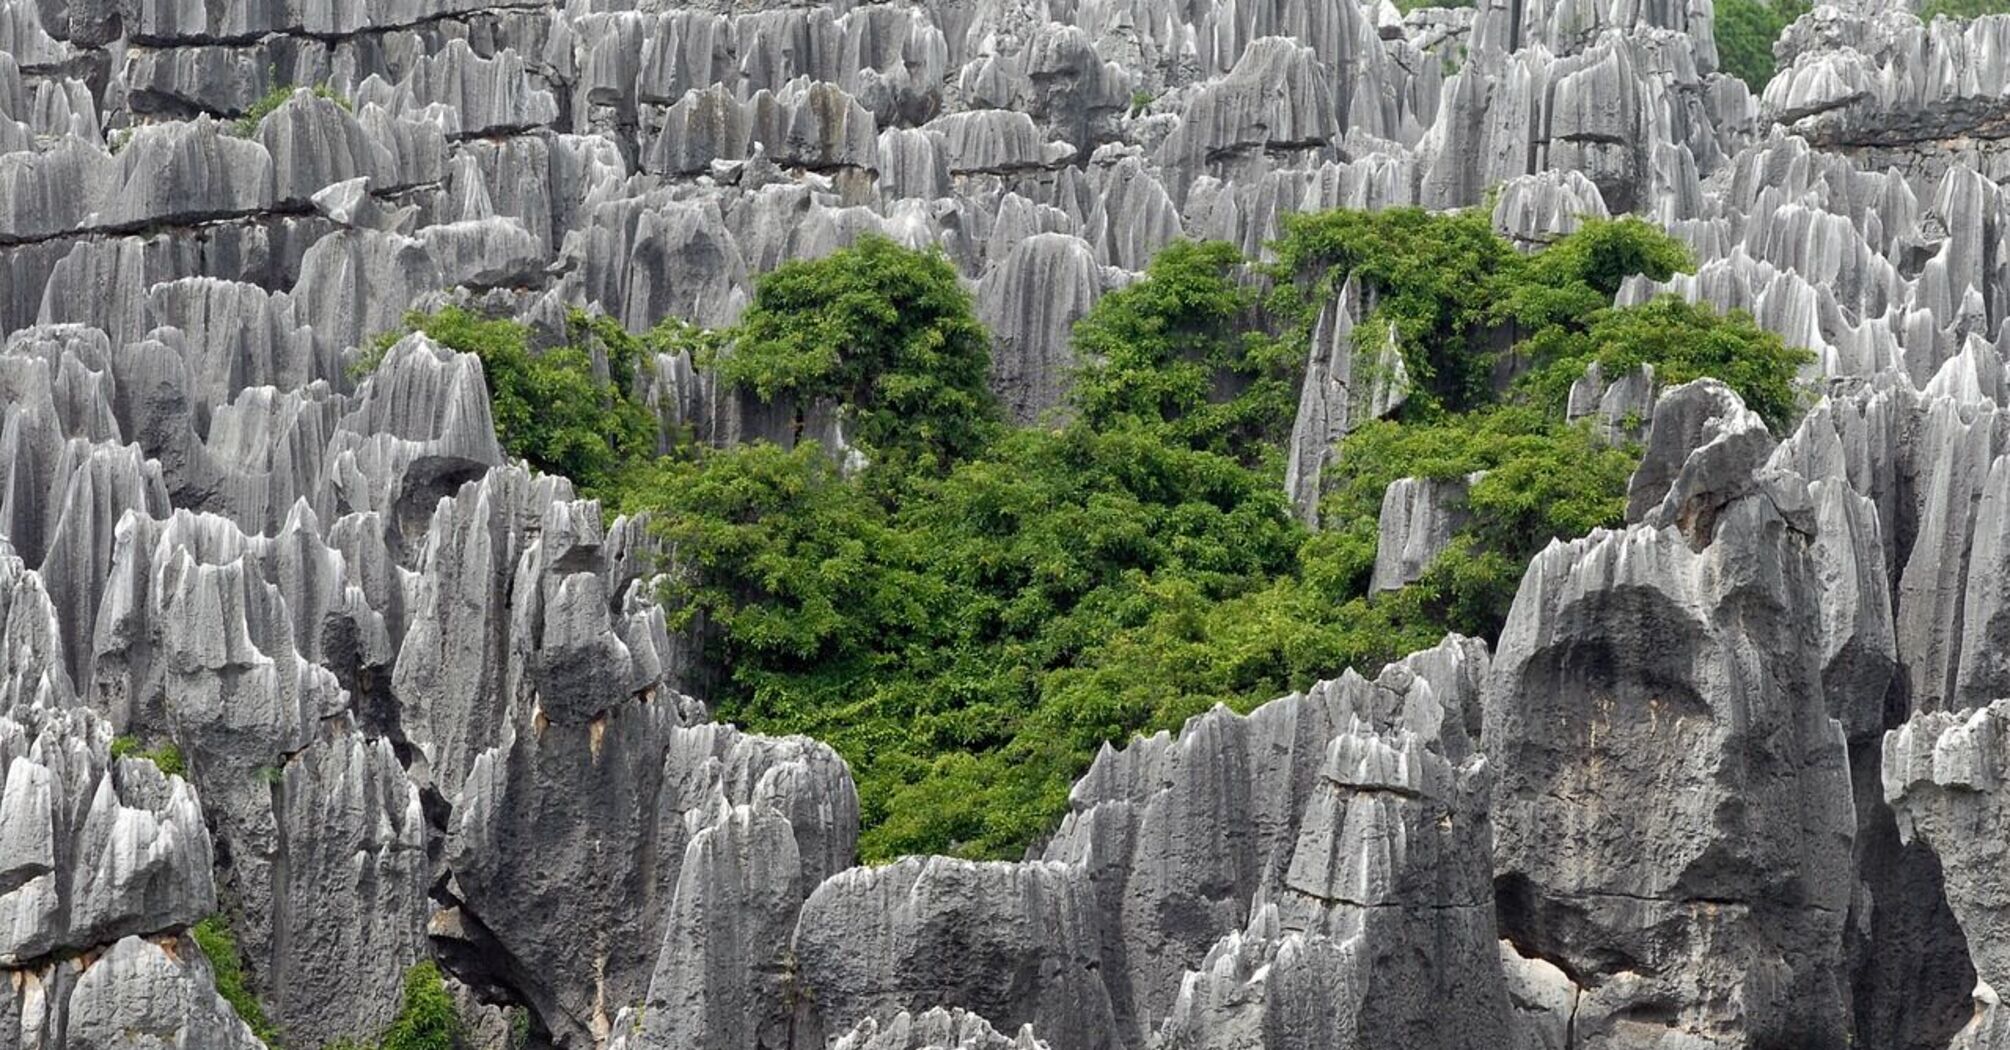 Cities of giants, salt flats, and stone forests: top 5 natural geological wonders of the world